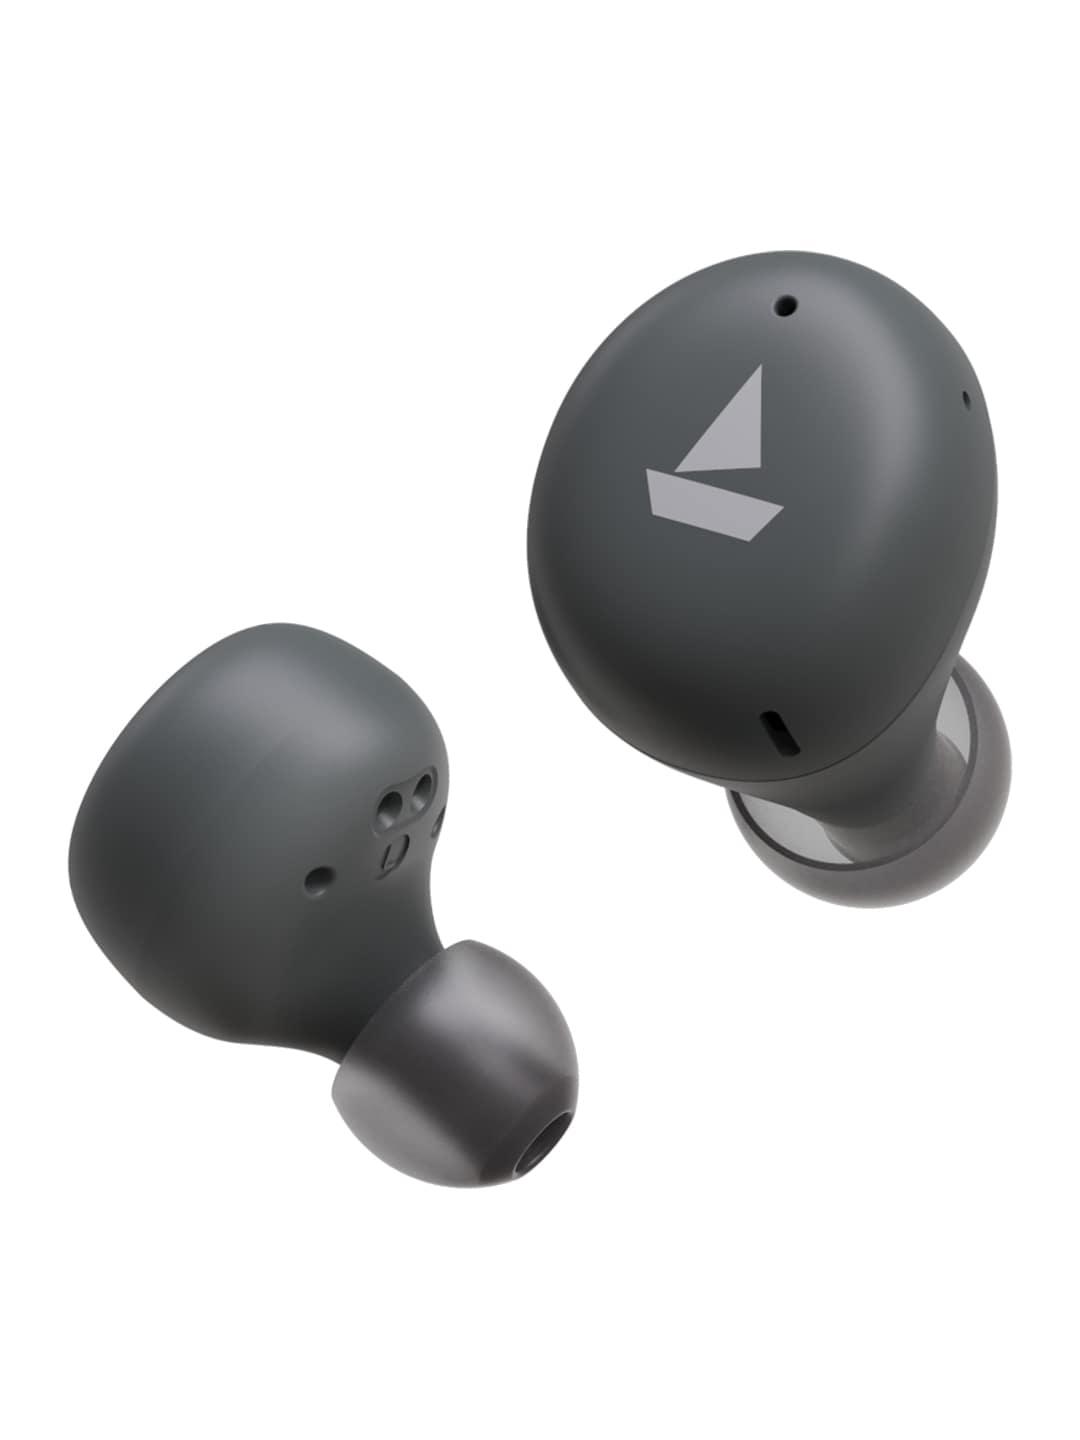 boat grey airdopes 381 m tws earbuds with up to 20h playback